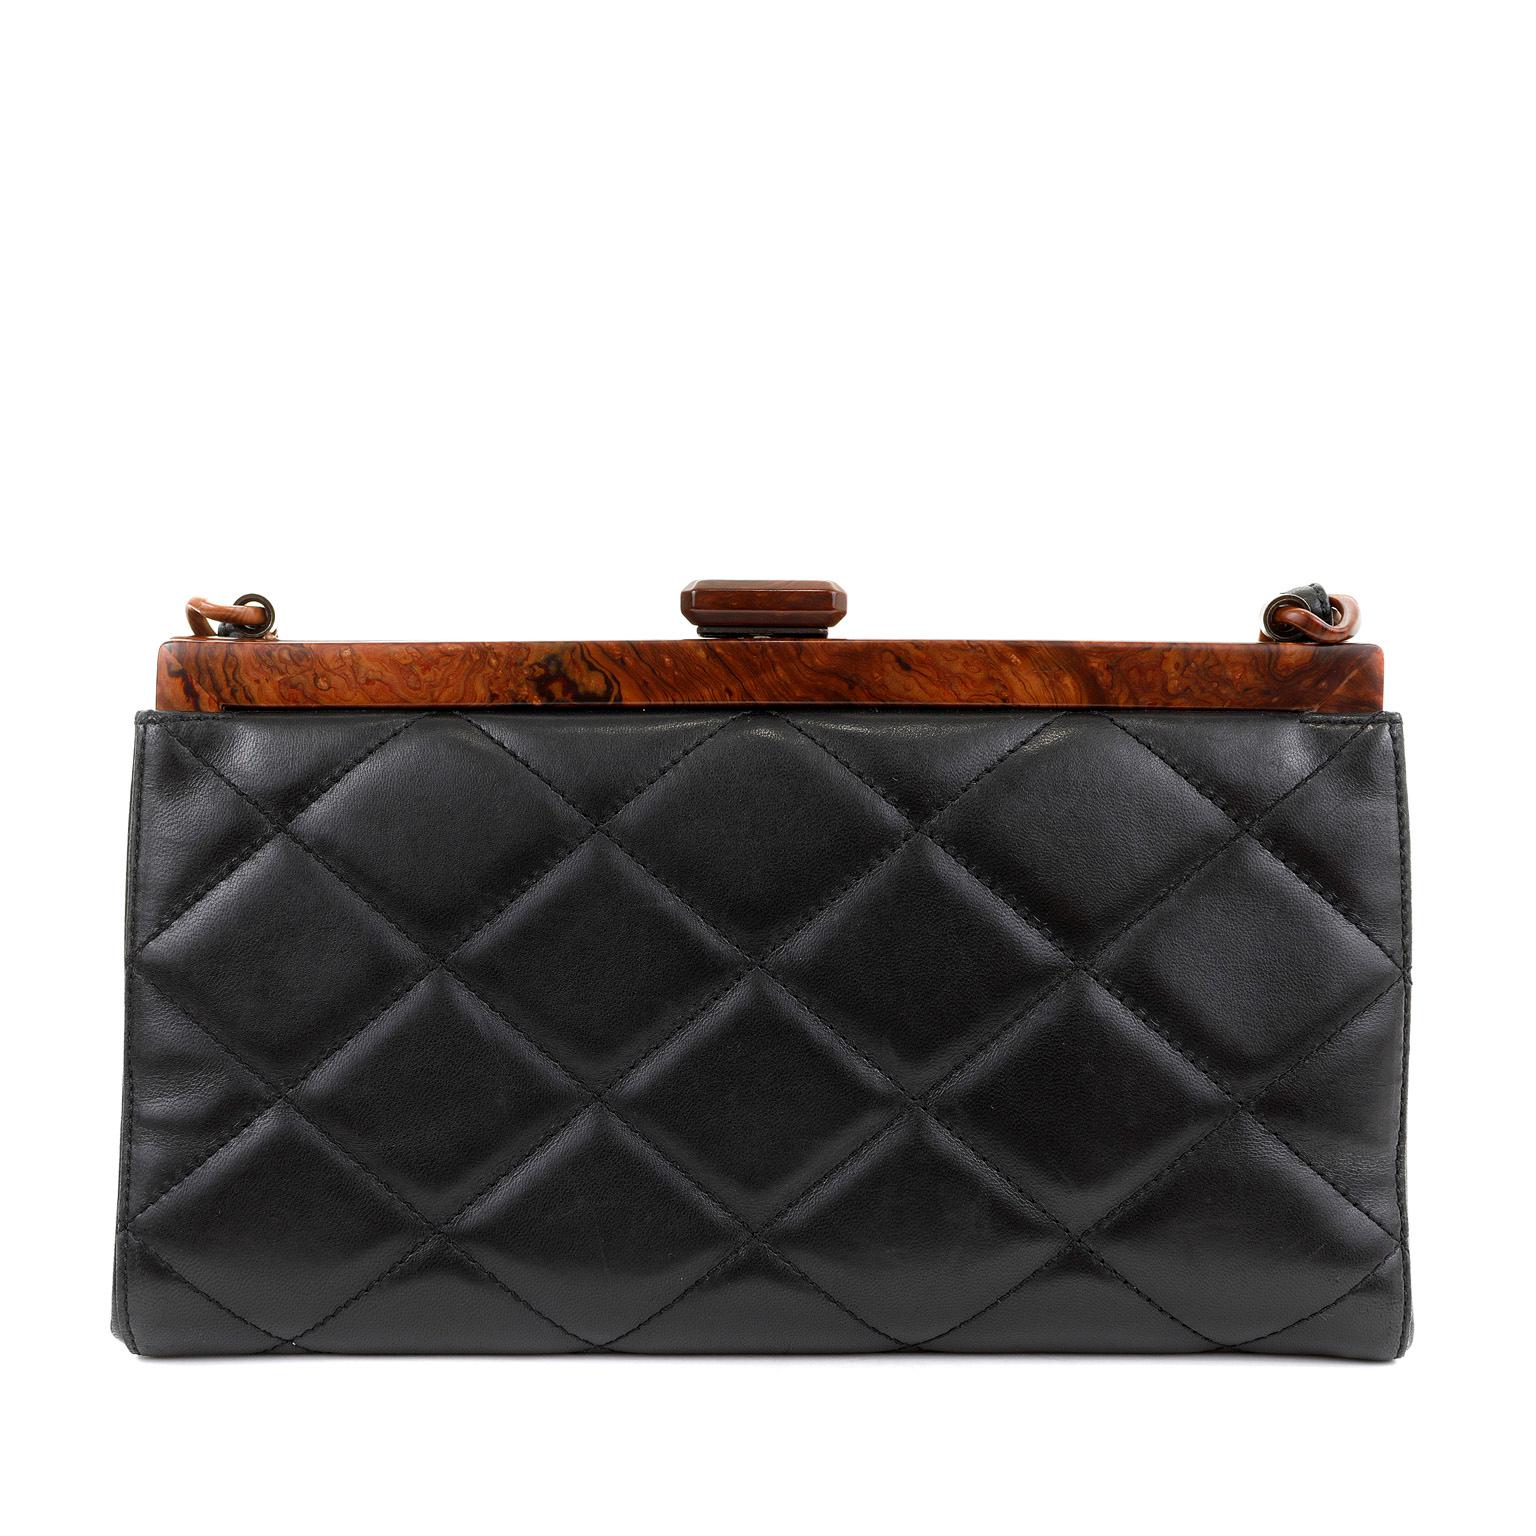 Women's Chanel Black Quilted Leather Wood Framed Bag